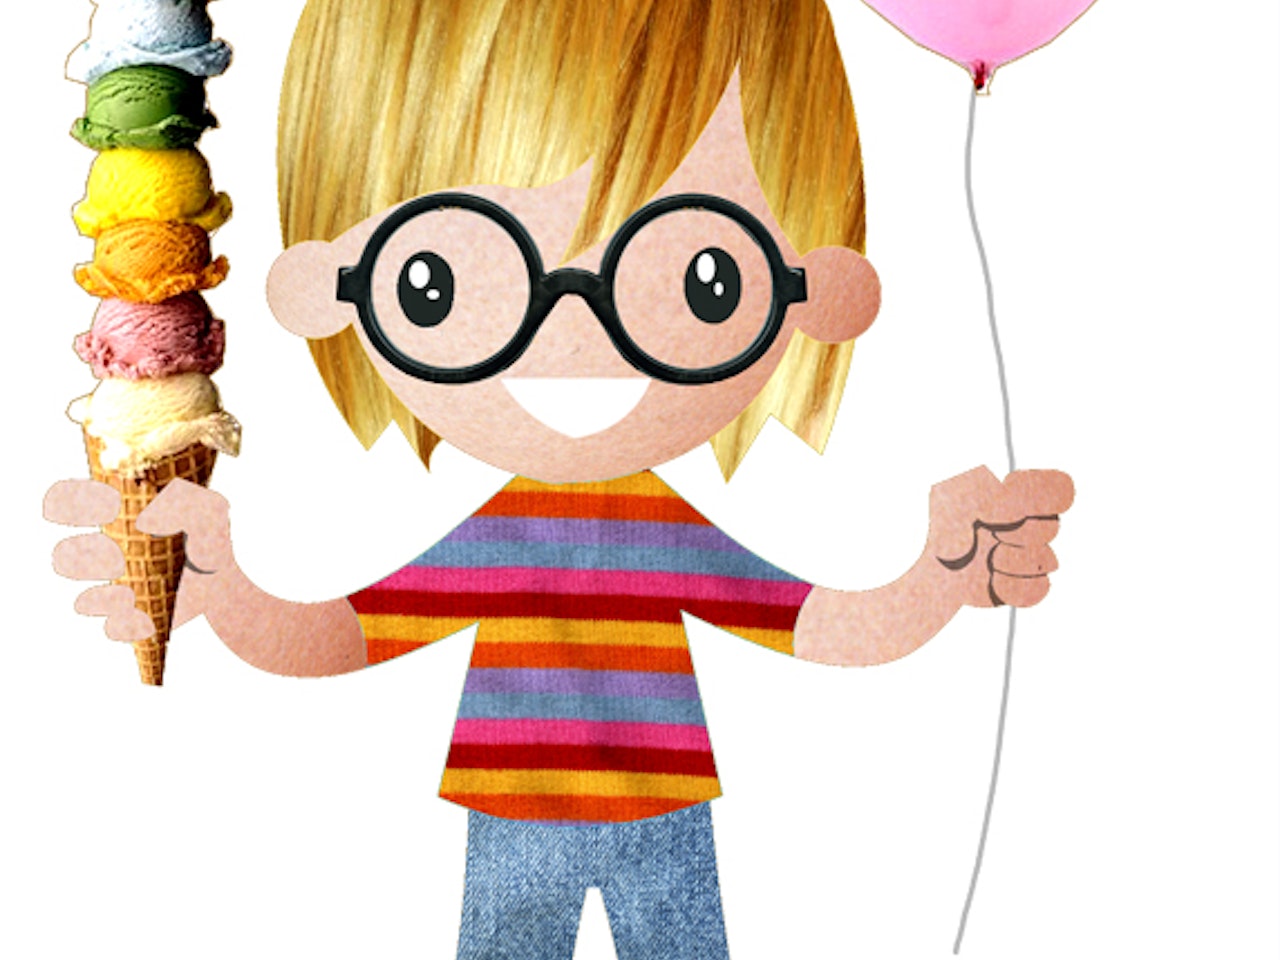 young boy glasses collage funny happy humorous comical colourful graphic illustration